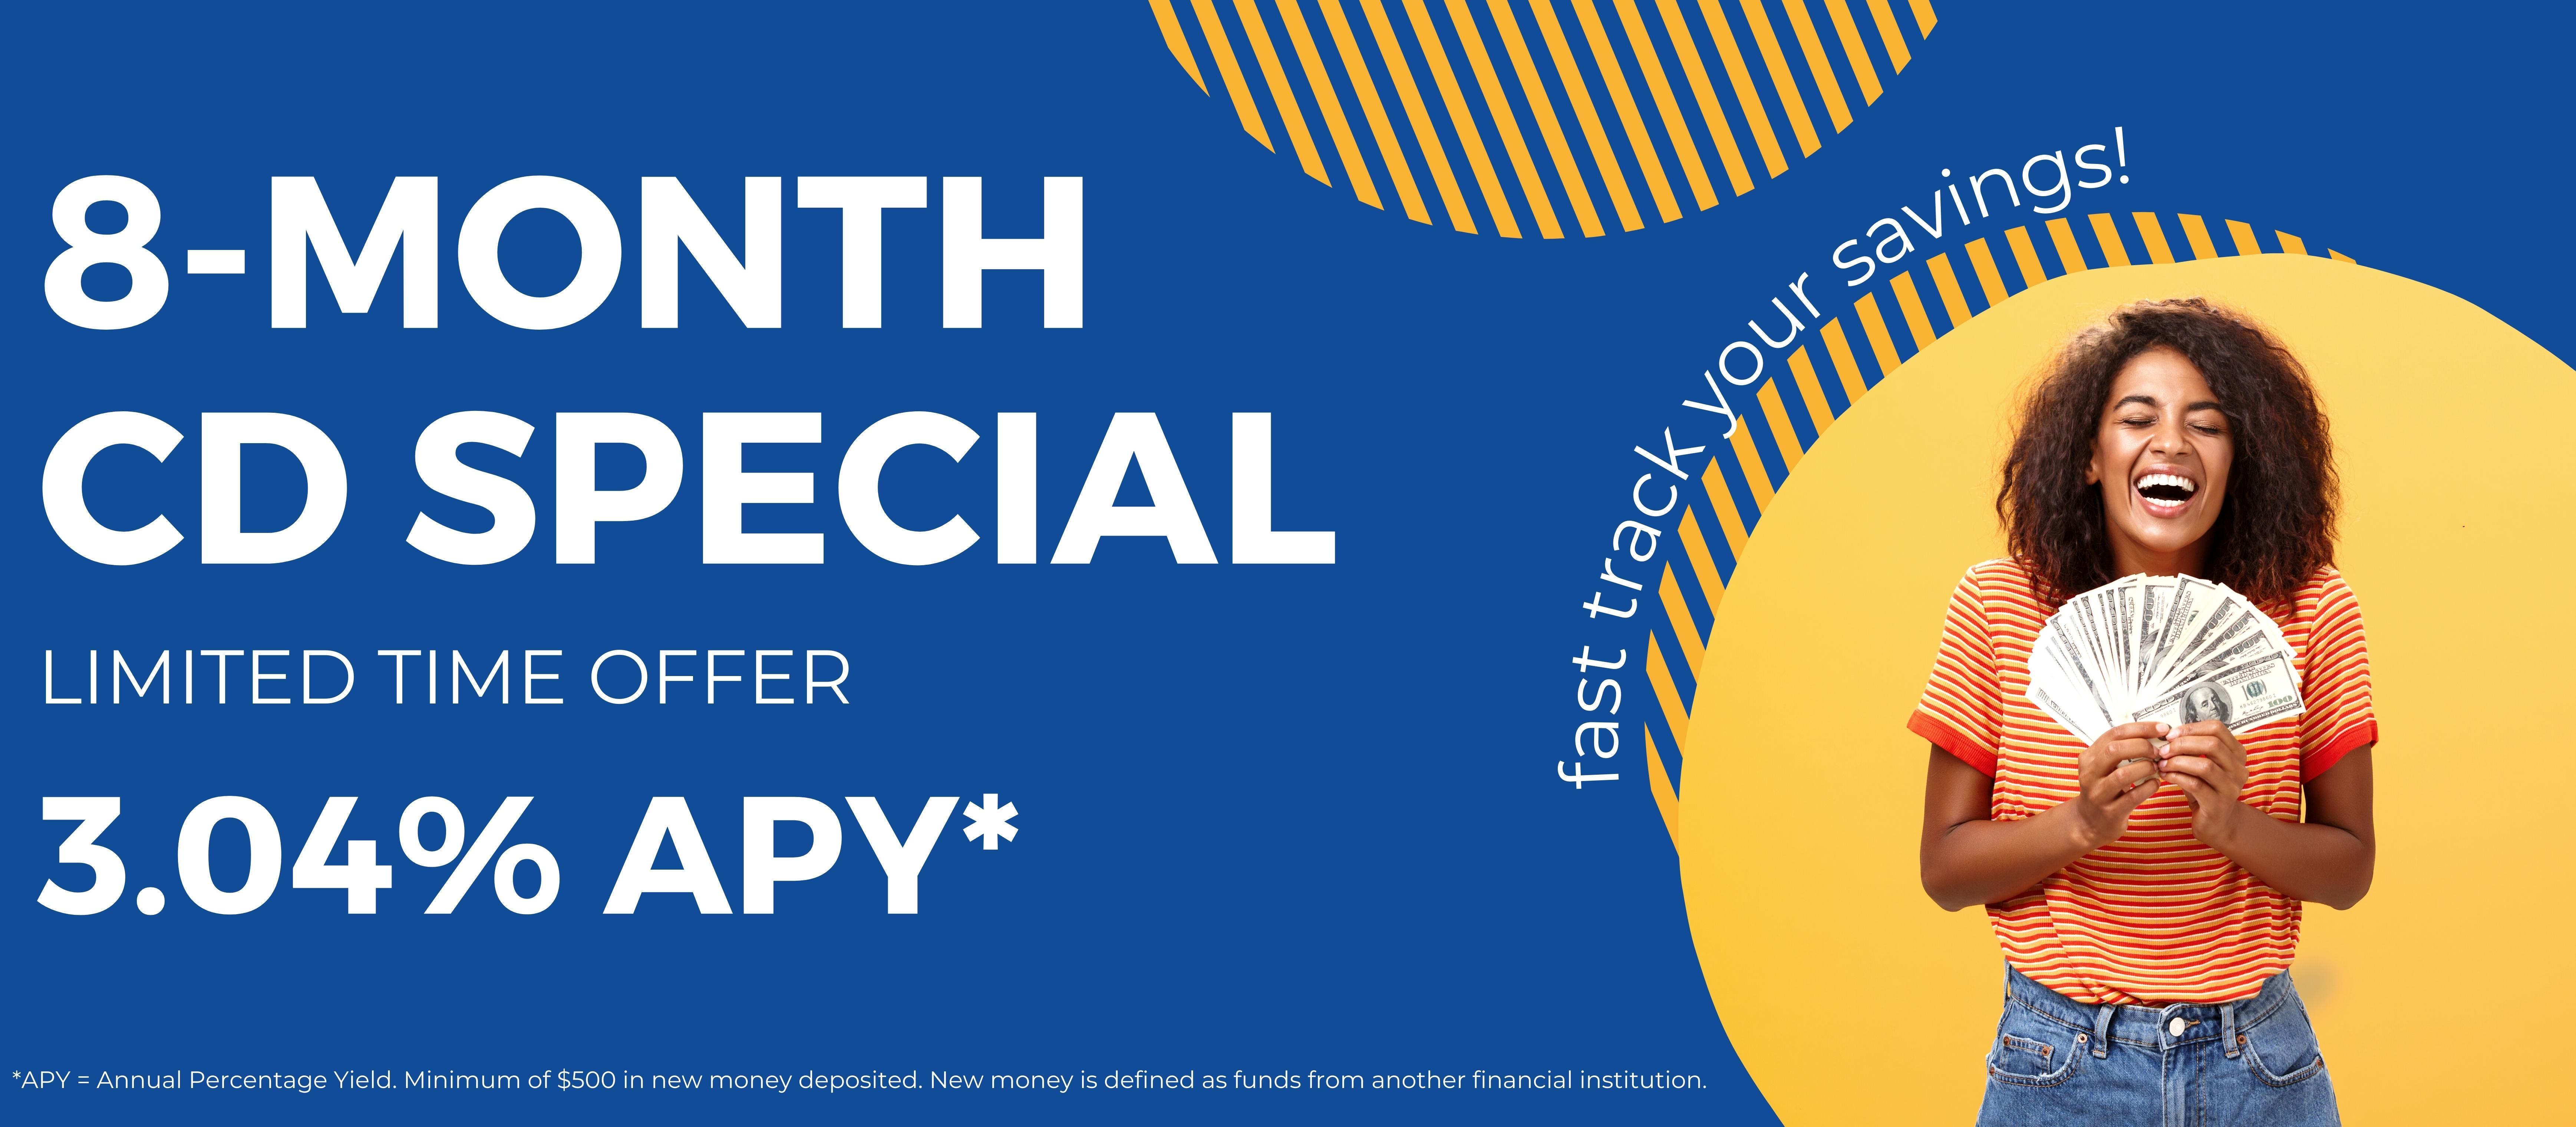 Limited Time 16-Month CD Special - take advantage of 3.04% APY